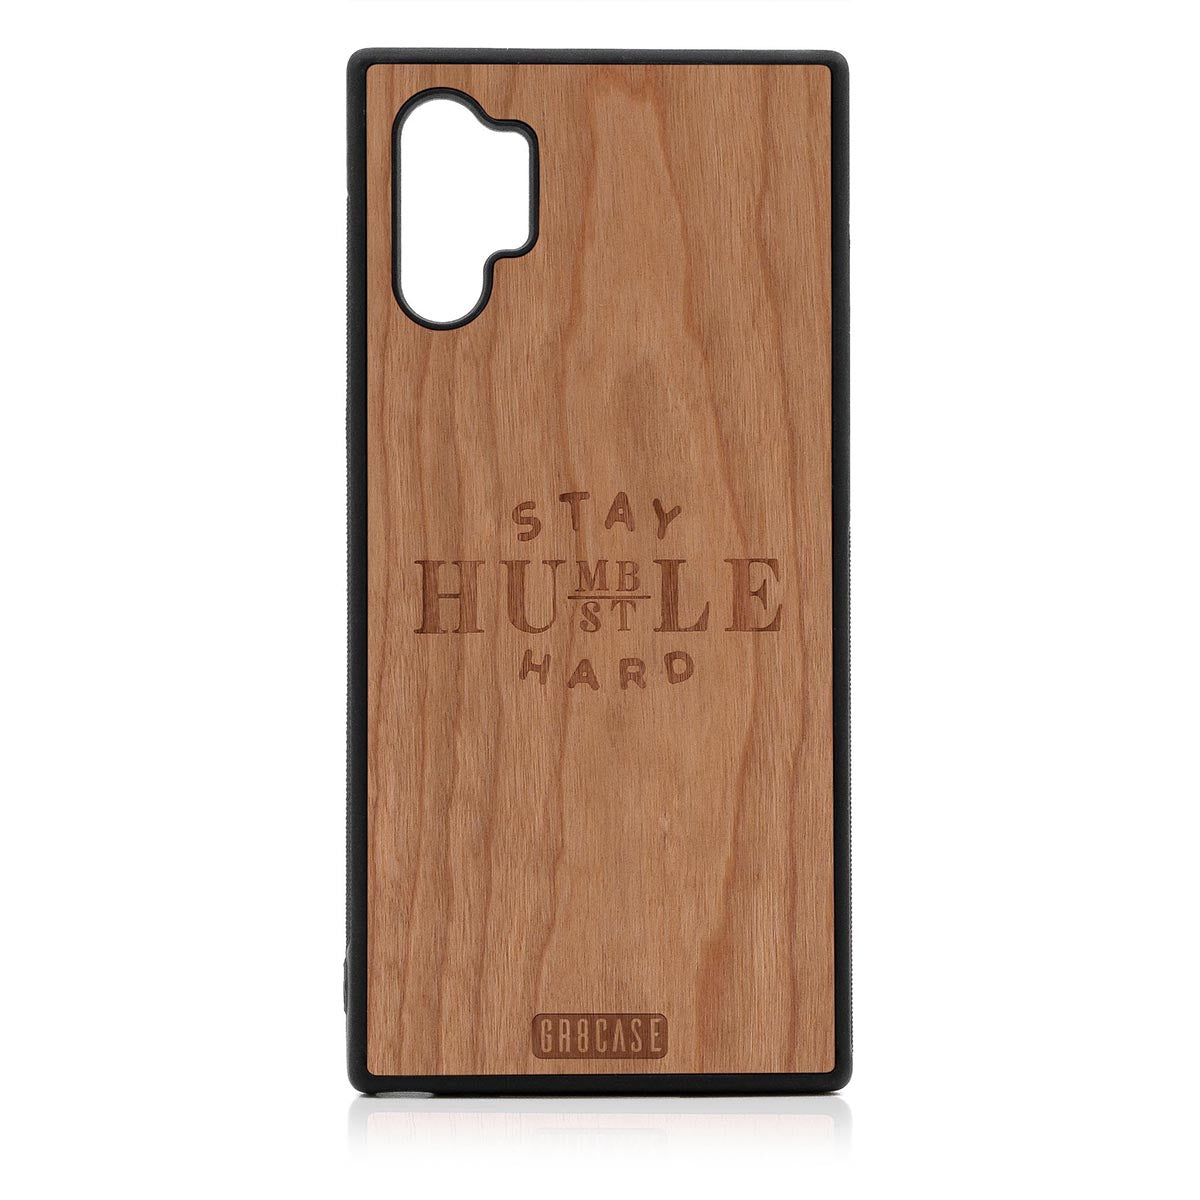 Stay Humble Hustle Hard Design Wood Case Samsung Galaxy Note 10 Plus by GR8CASE